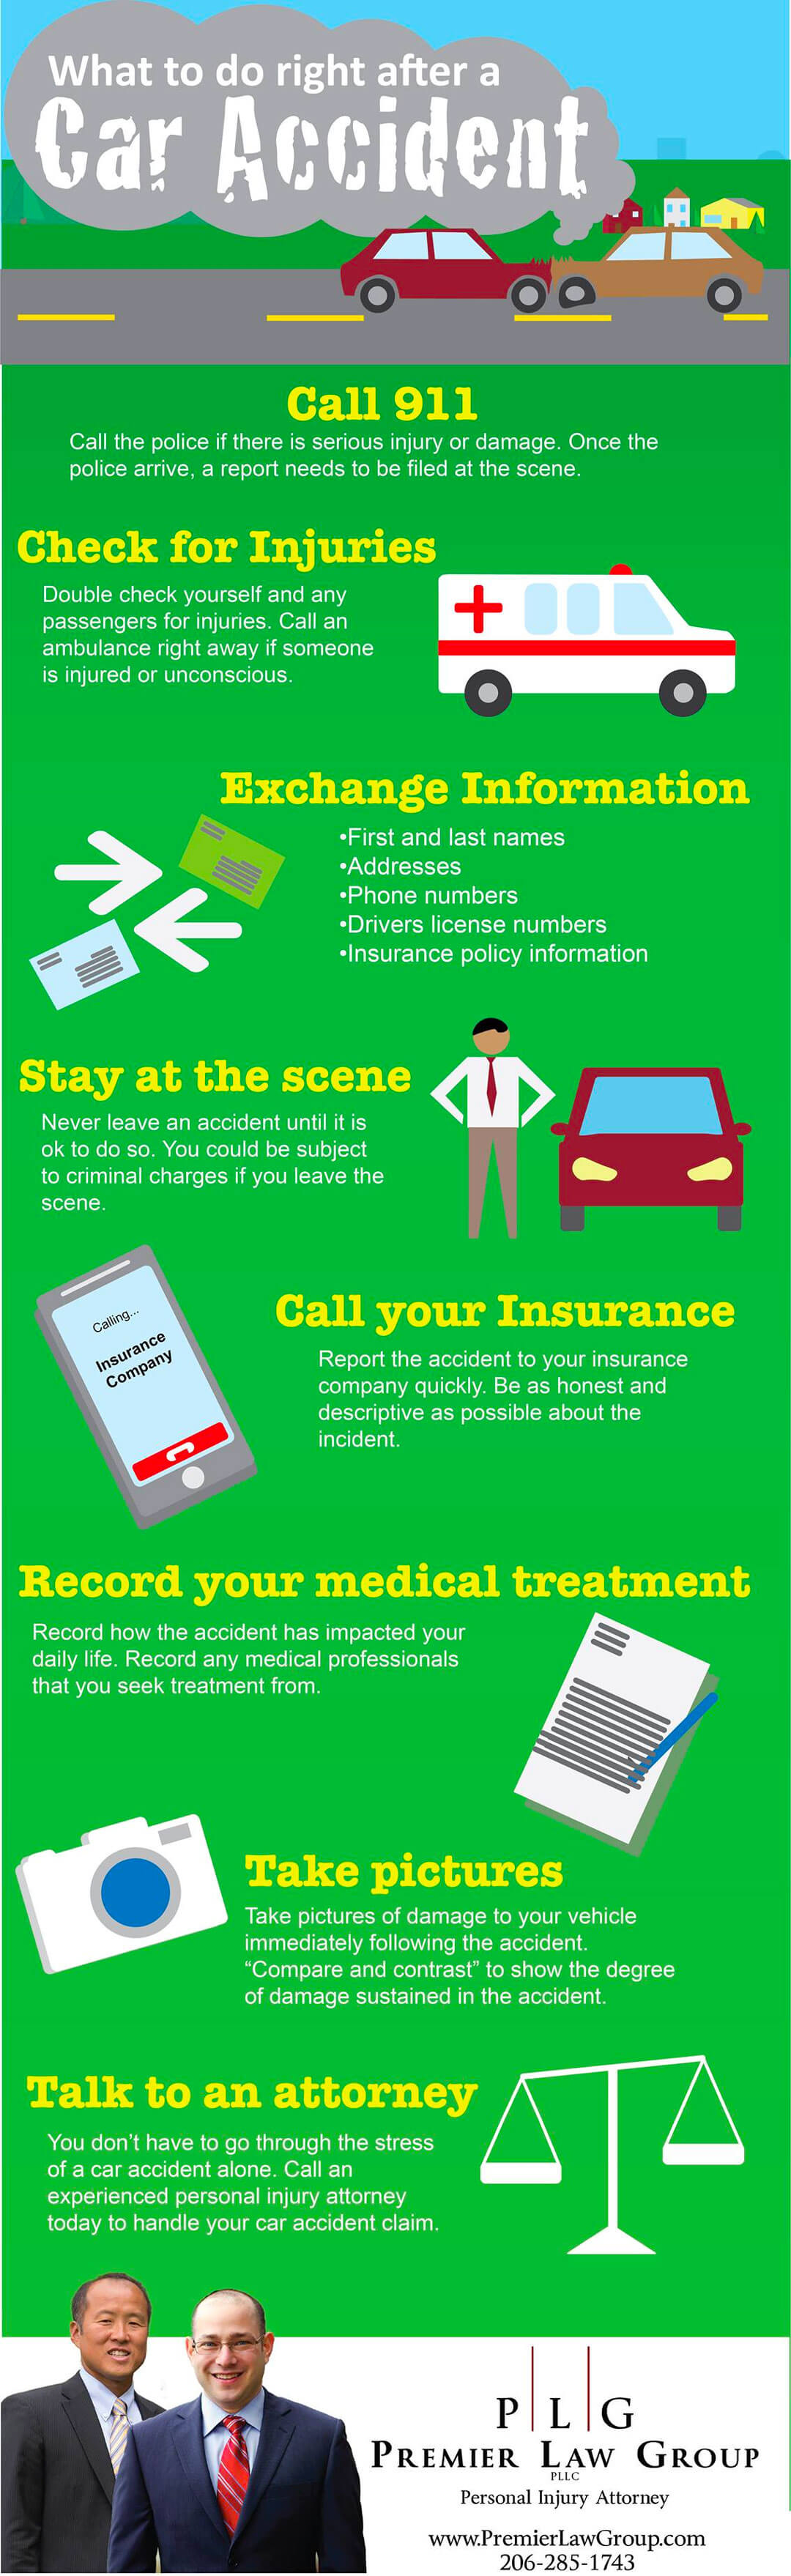 What to do right after a car accident